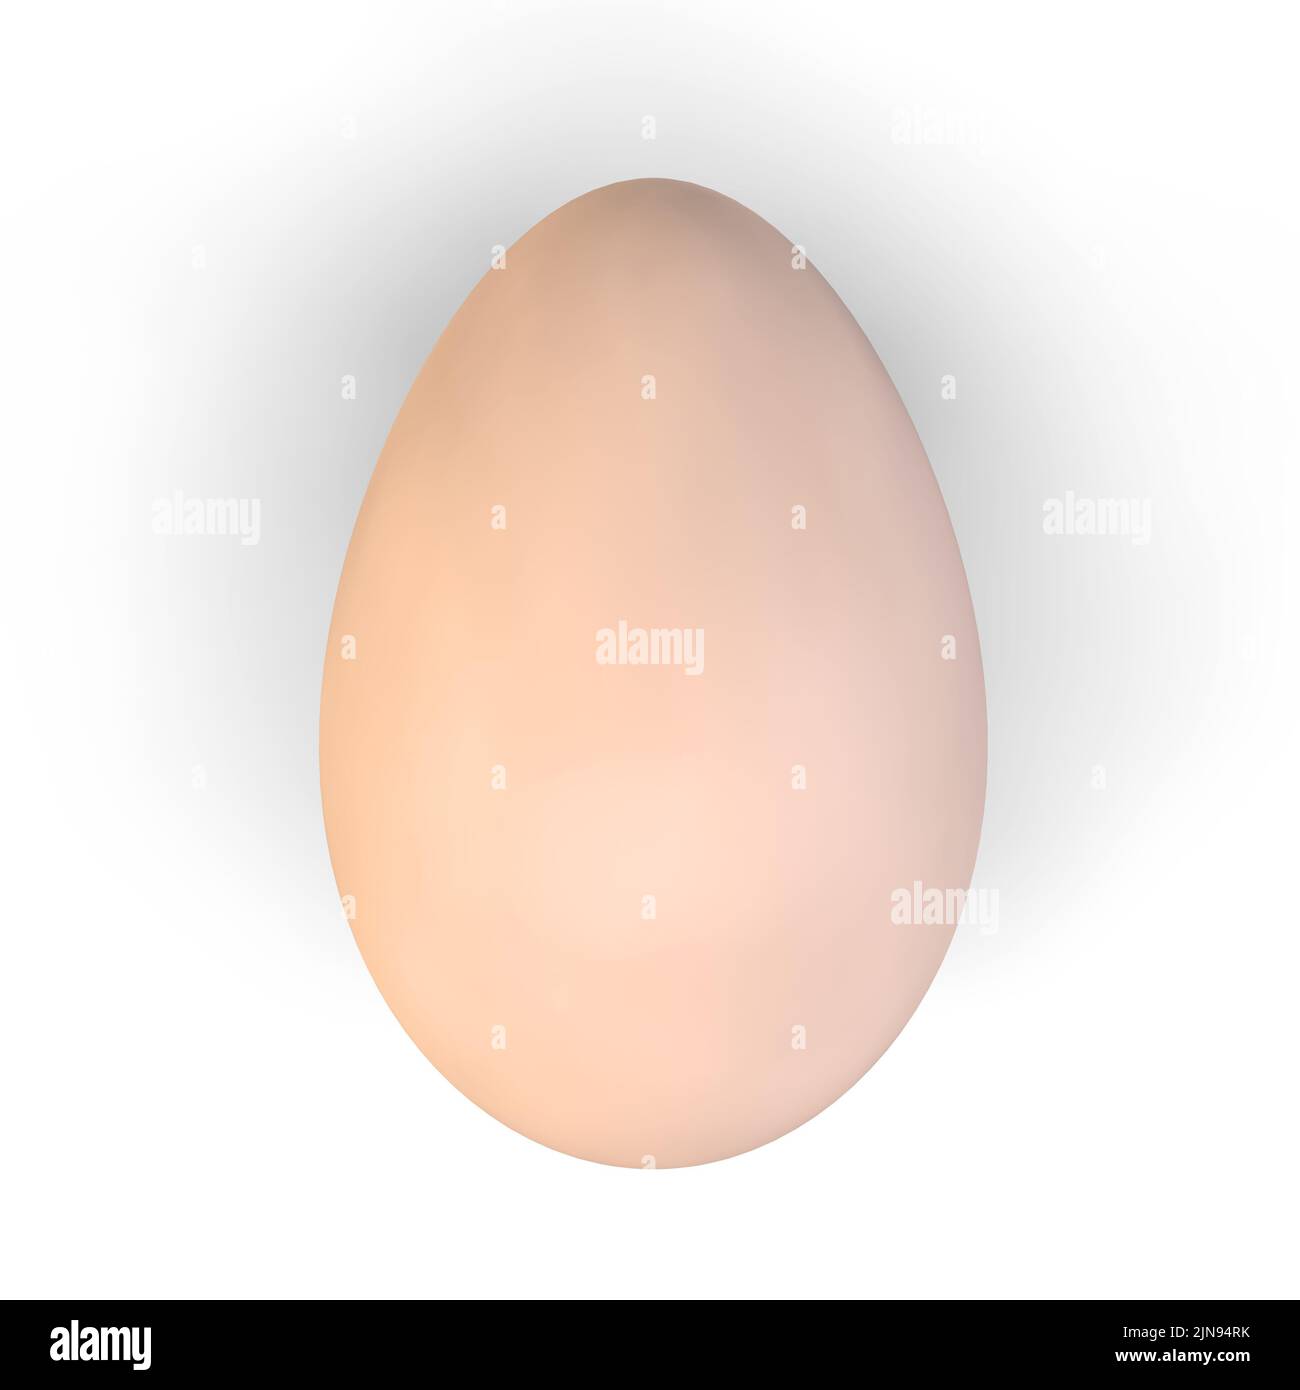 3d render of a chicken egg on a white background. View from above. Stock Photo